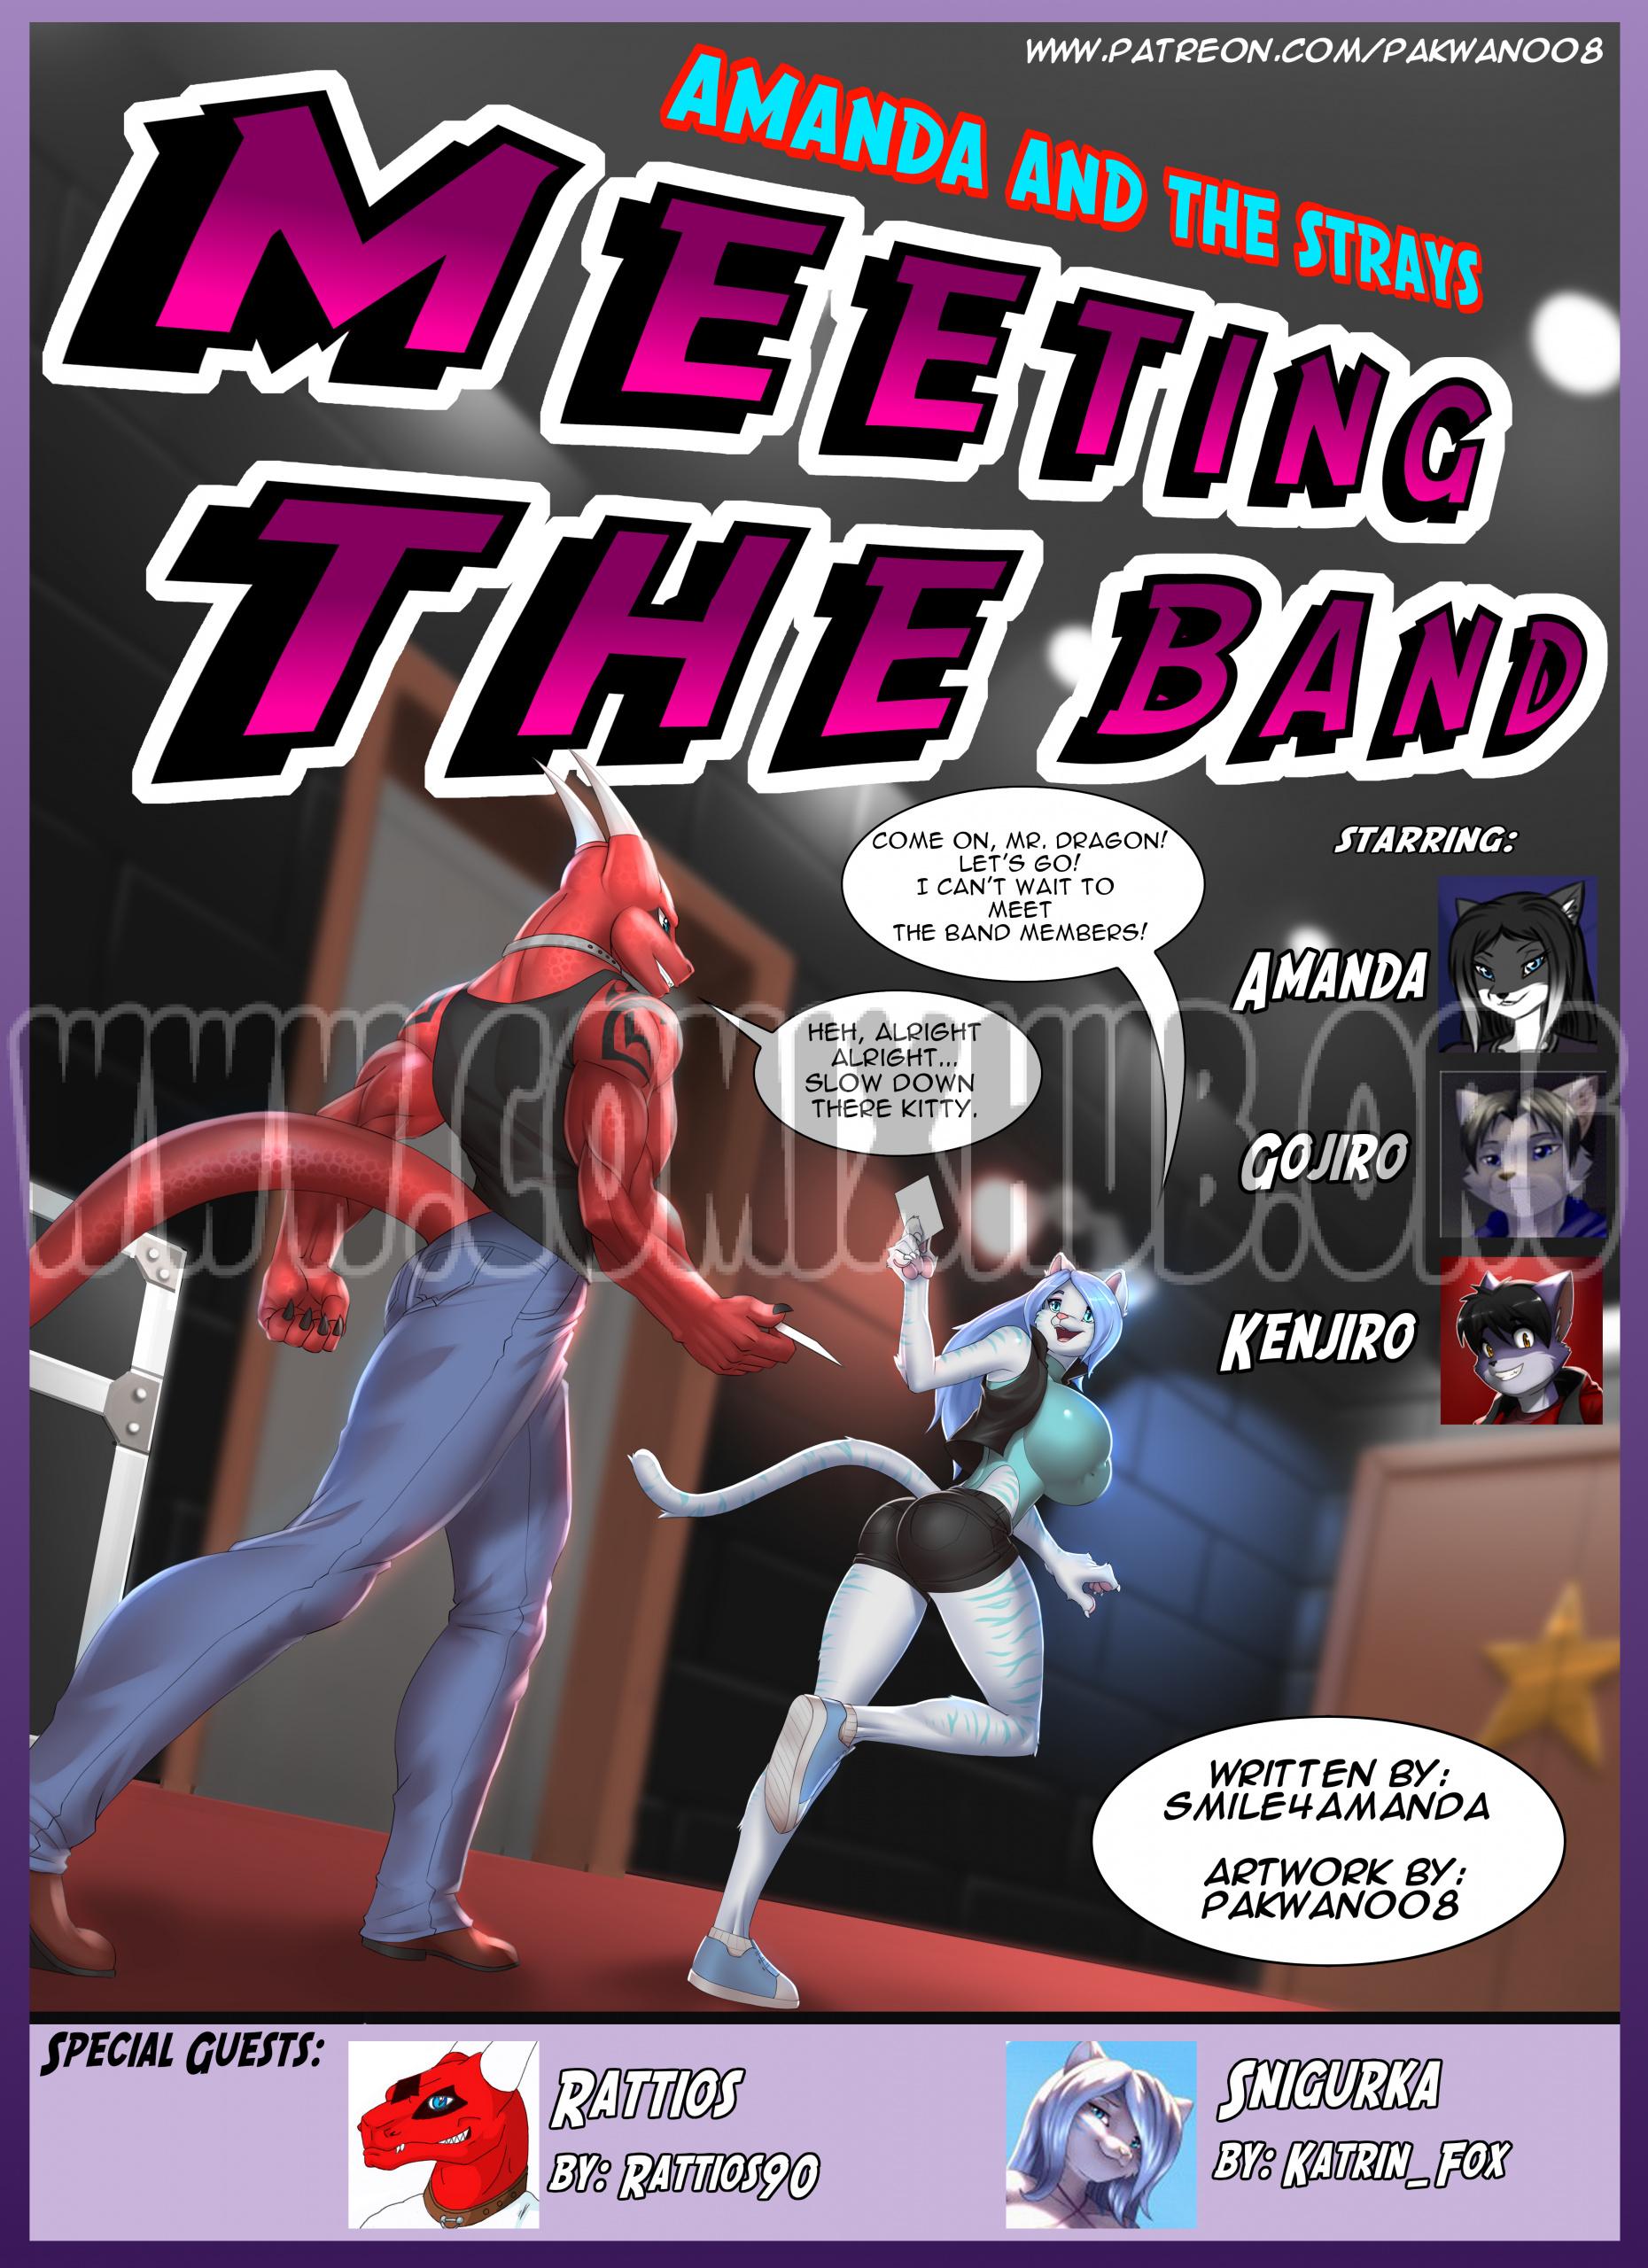 Meeting the Band Oral sex, Anal Sex, Big Tits, Blowjob, Cum Shots, Cum Swallow, Double Penetration, Furry, Group Sex, Straight, Threesome, X-Ray